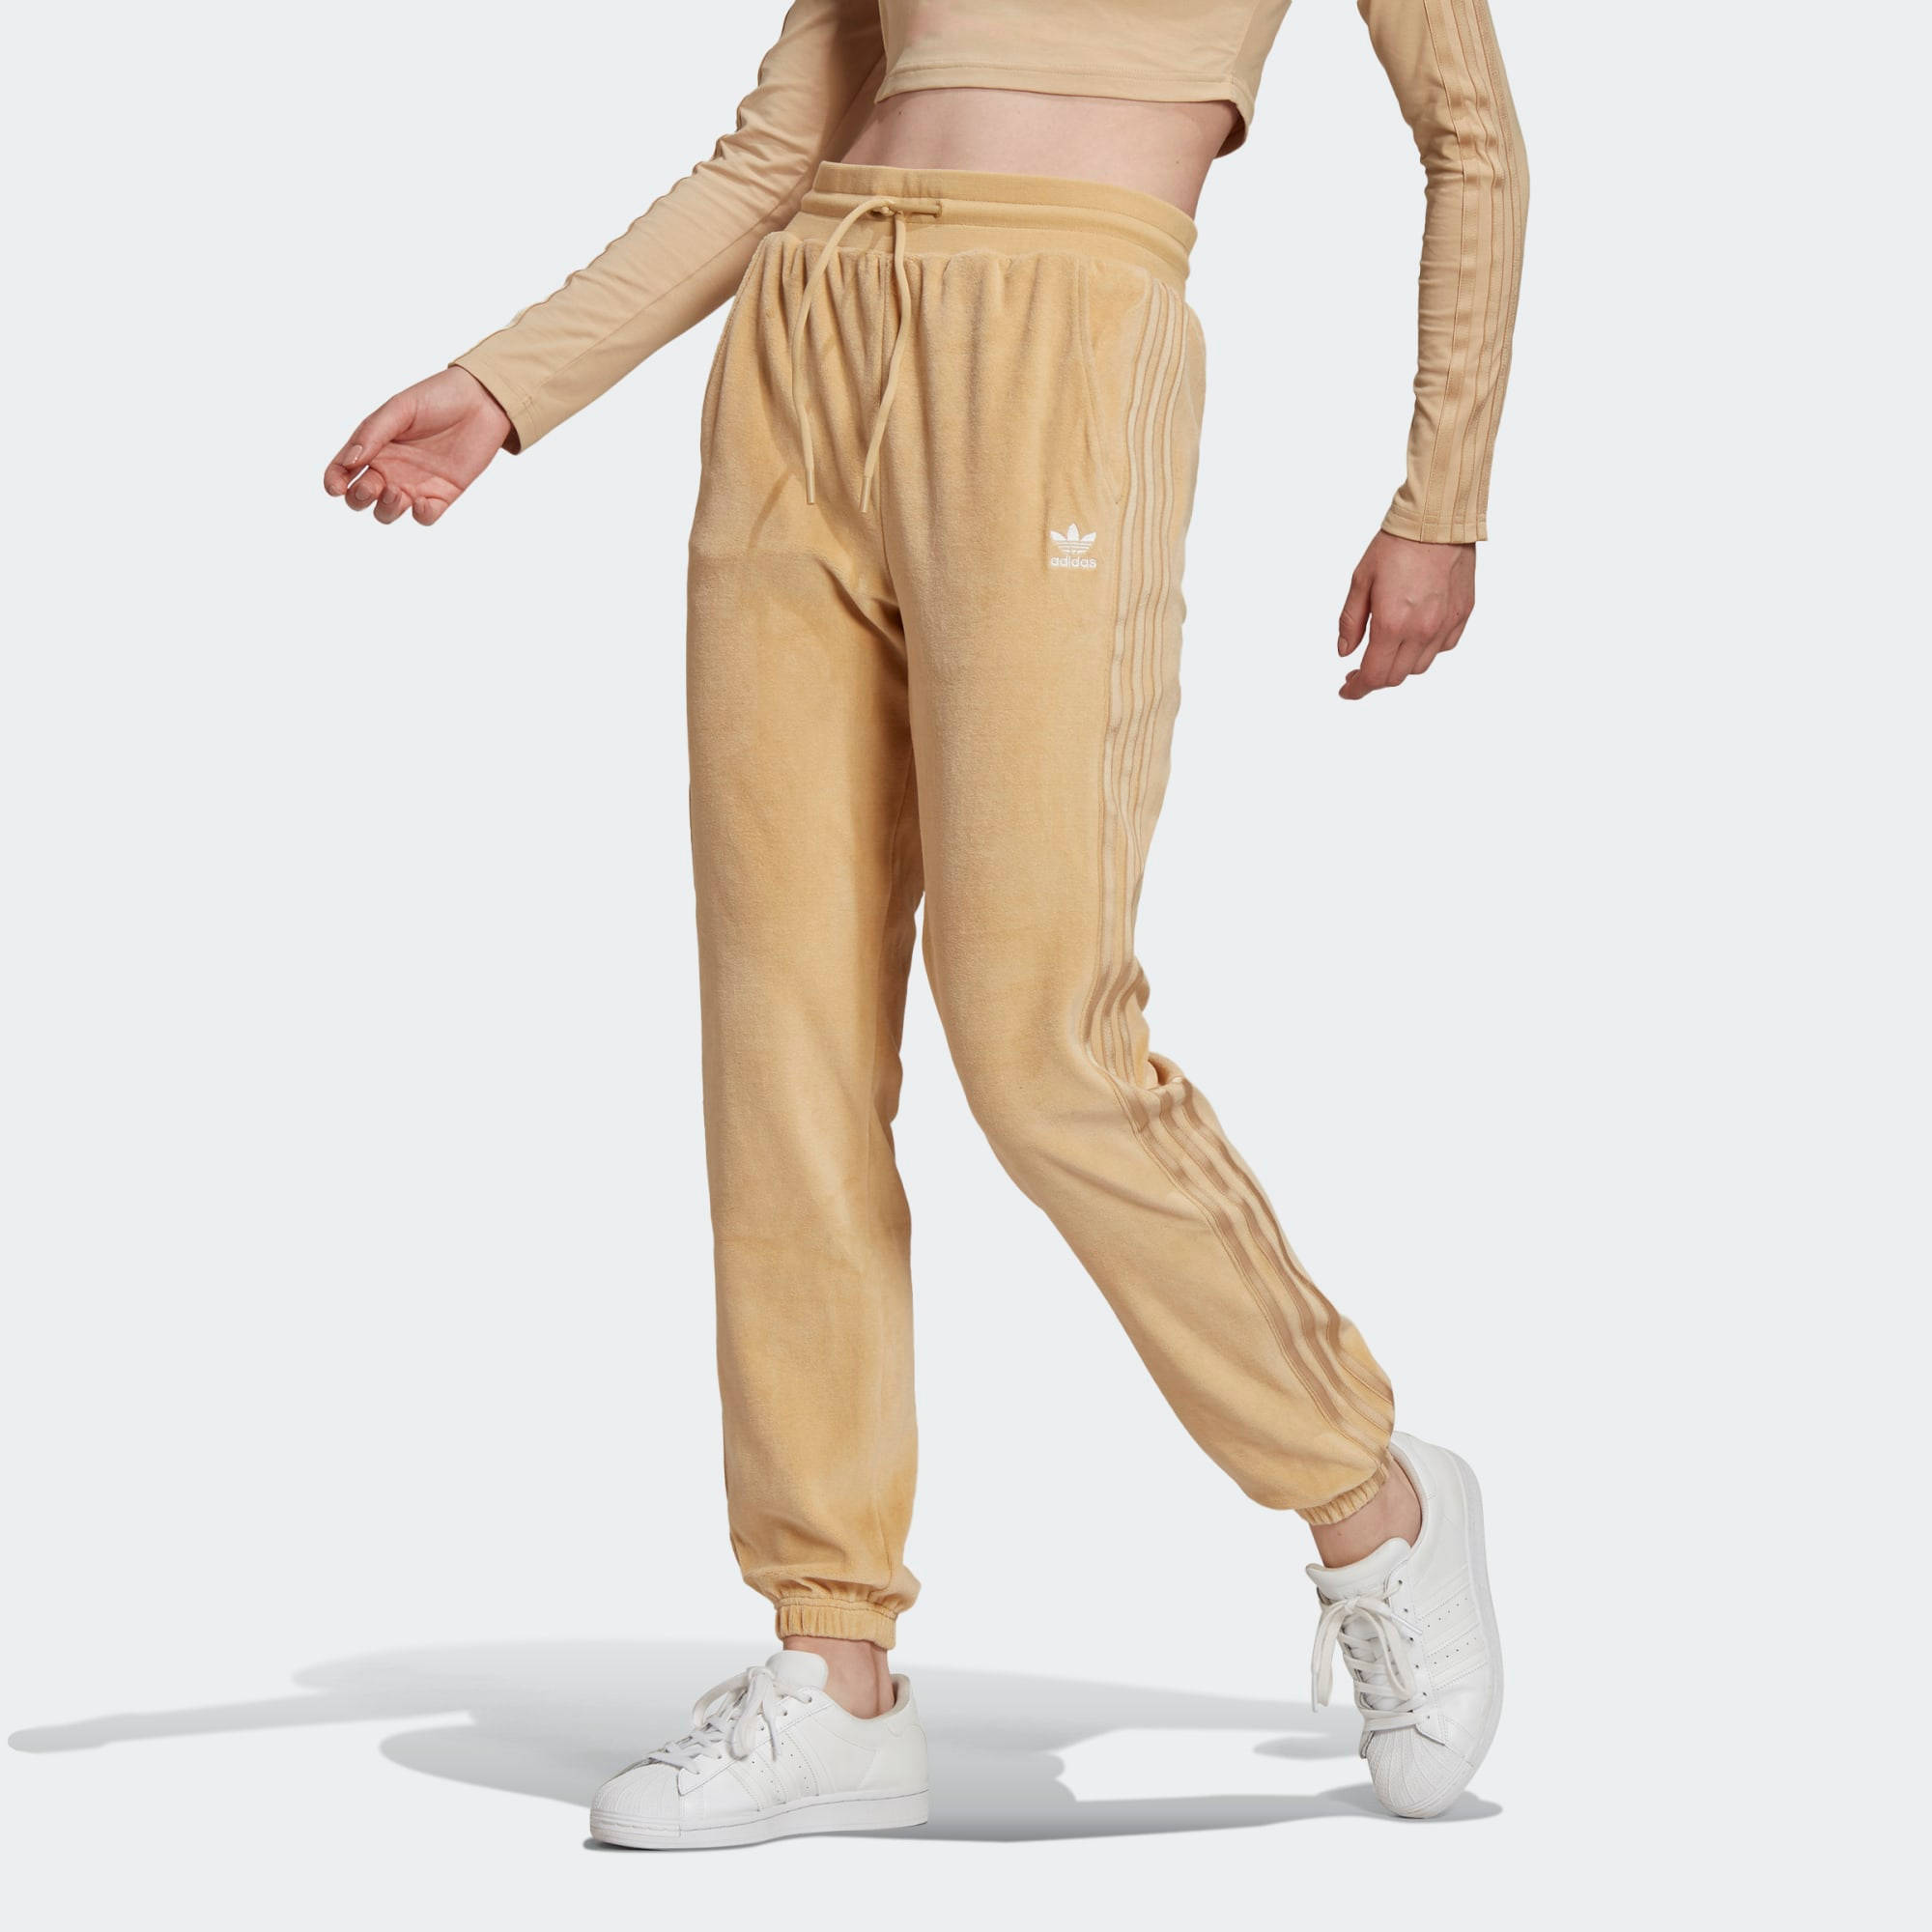 adidas Originals Loungewear Slim | Joggers Buy To Sole The Supplier Where | | H18820